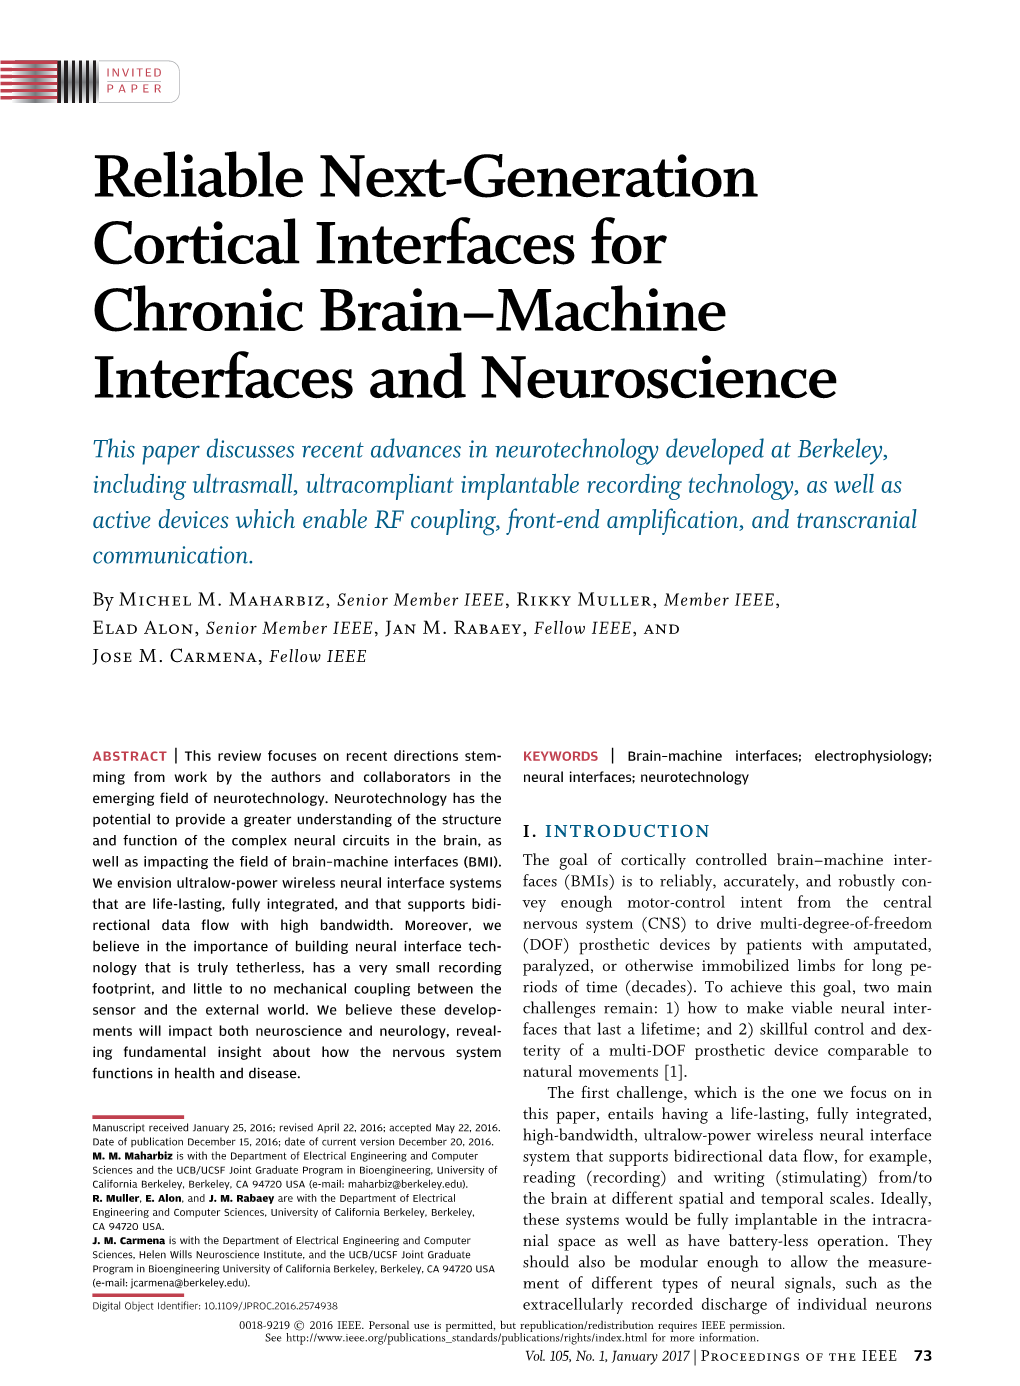 Reliable Next-Generation Cortical Interfaces for Chronic Brain